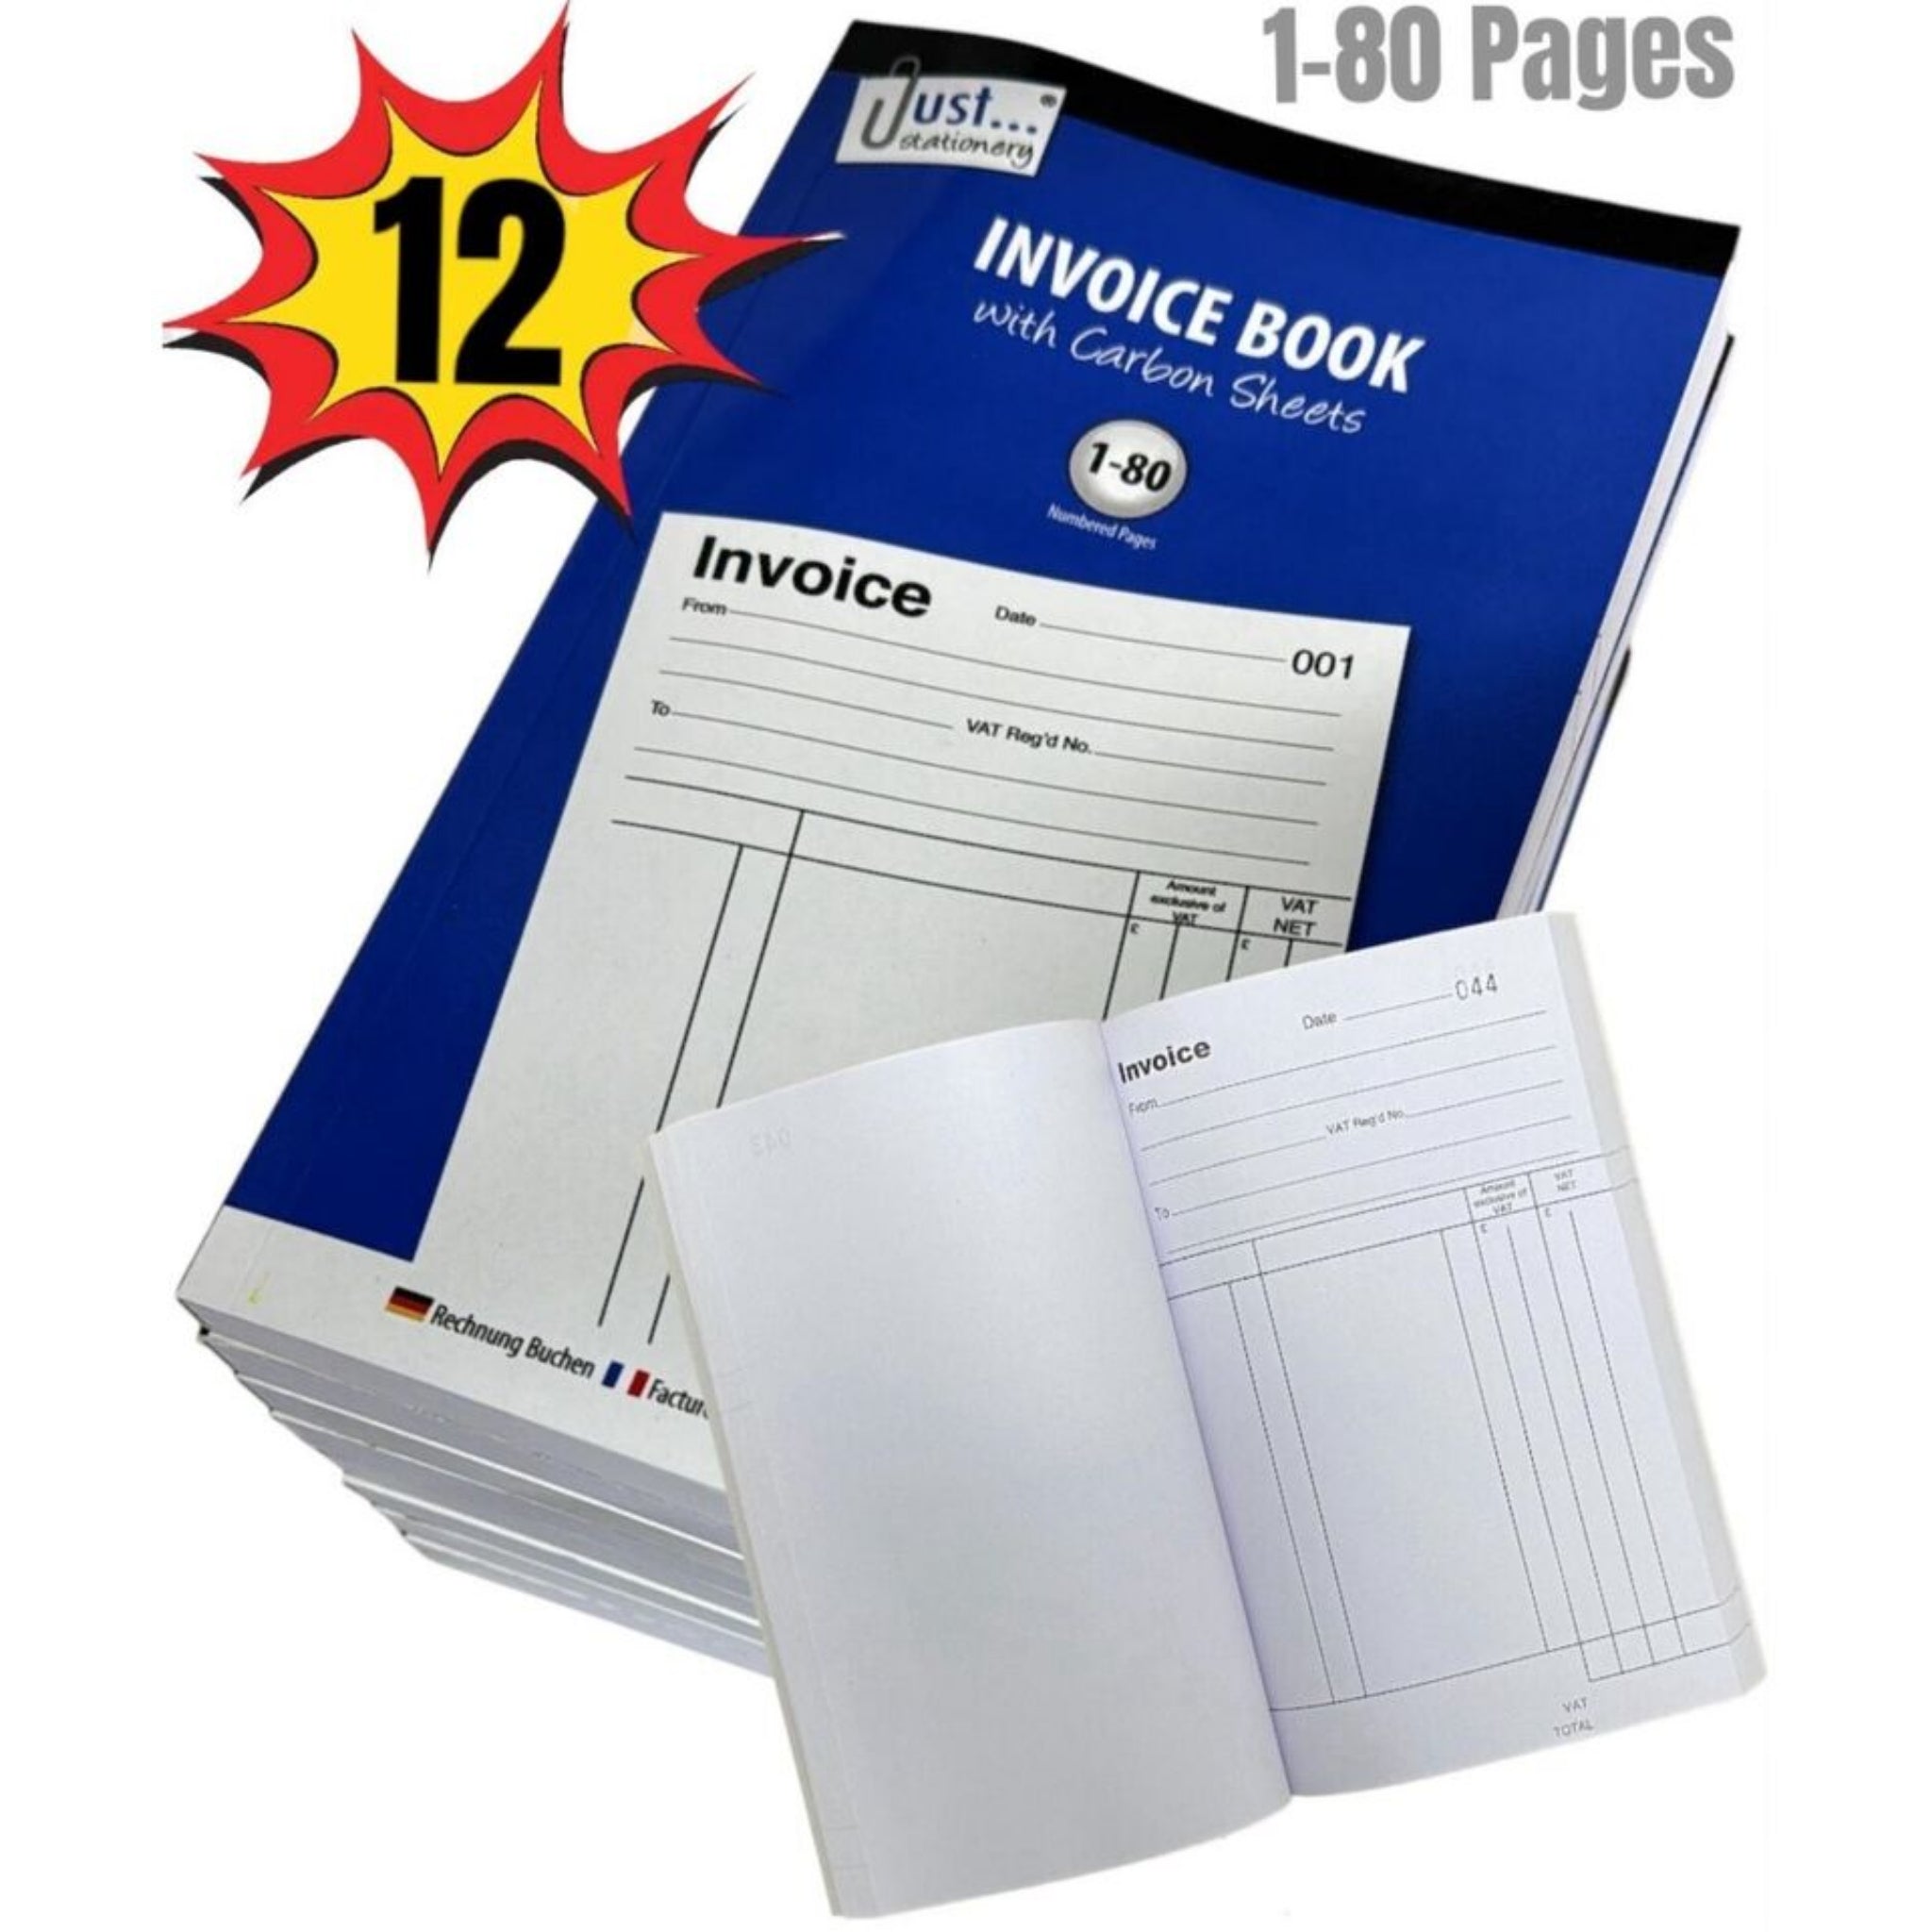 Beclen Harp 12 x A5 Invoice Duplicate Book With Carbon Sheet Full Size 1-80 Pages UK Seller